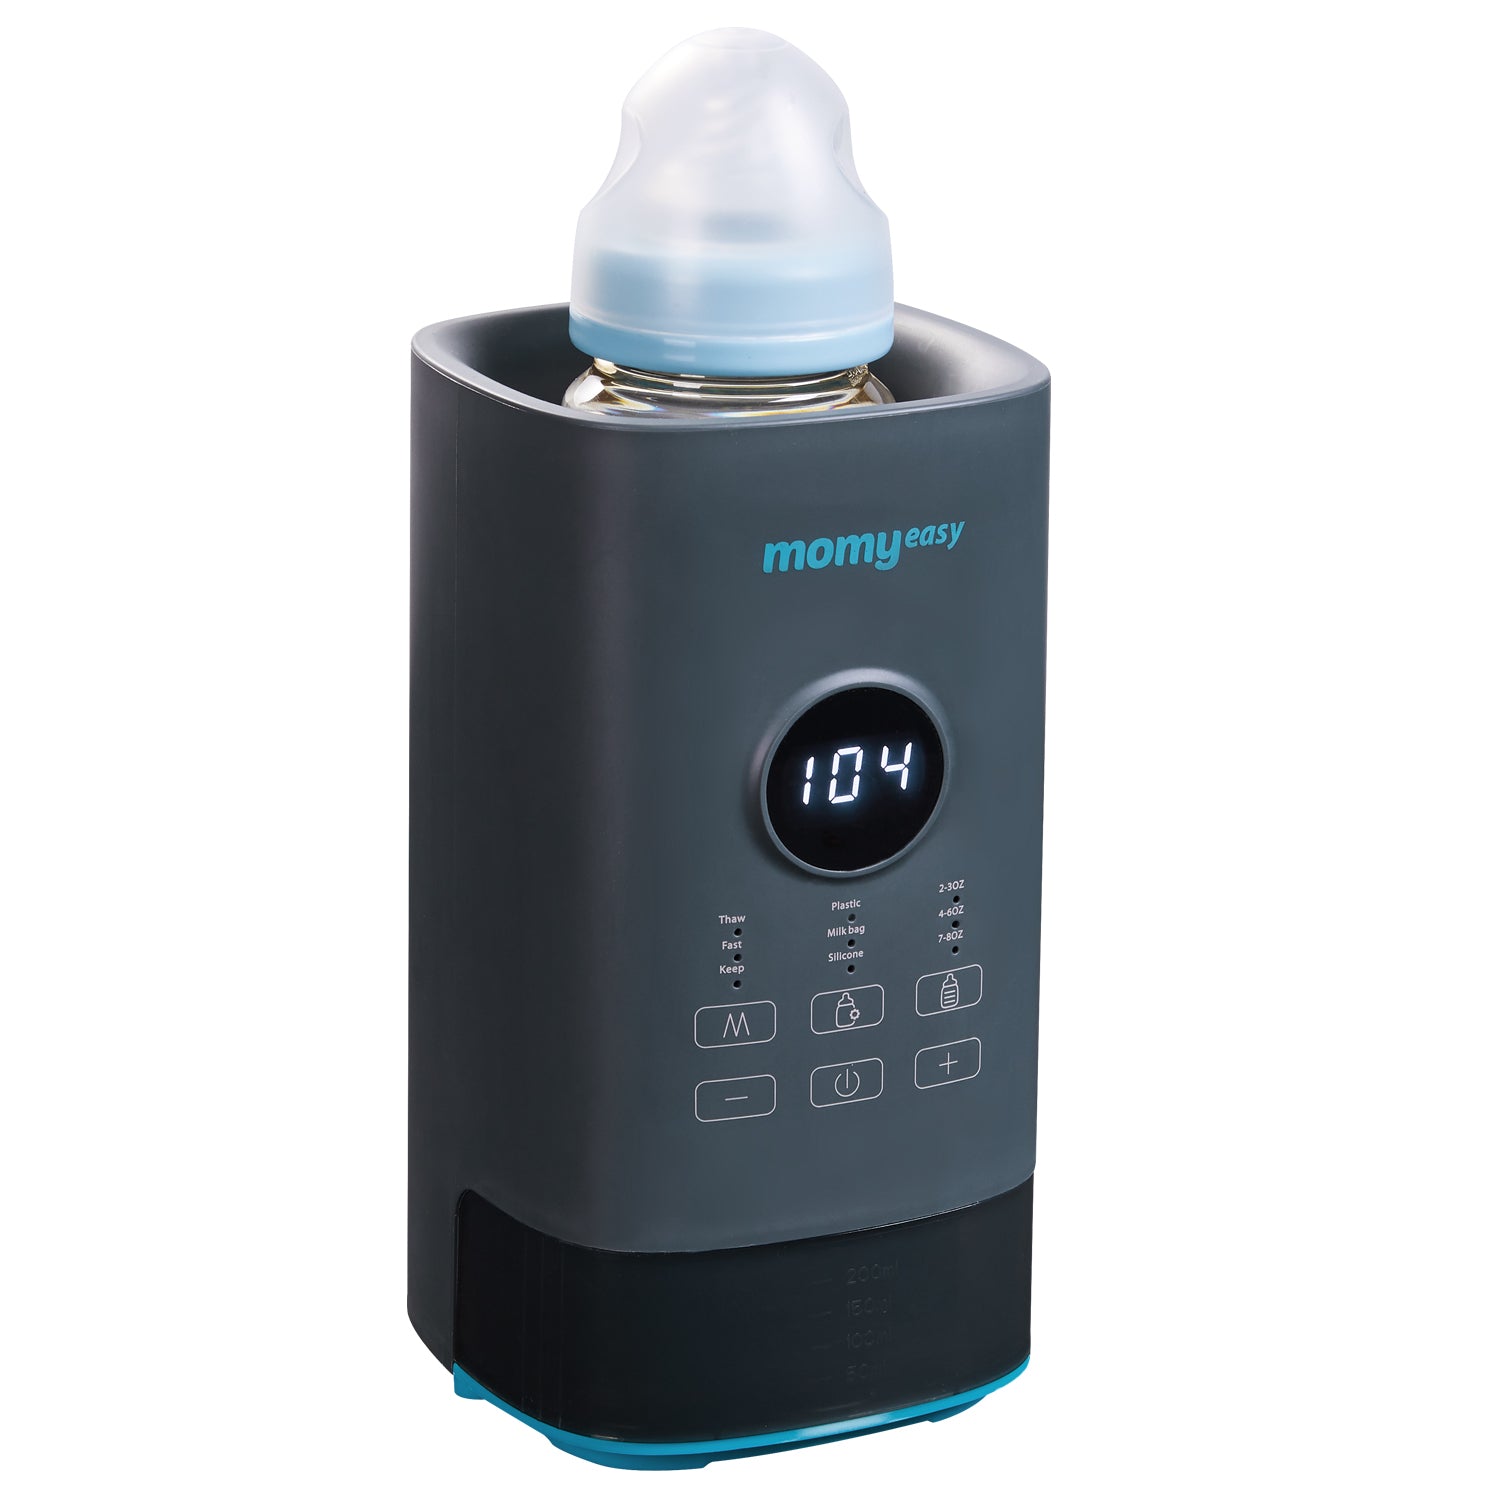 Momcozy Bottle Warmer Fast Bottle Warmers for All Bottles w/ Timer Accurate  Temp